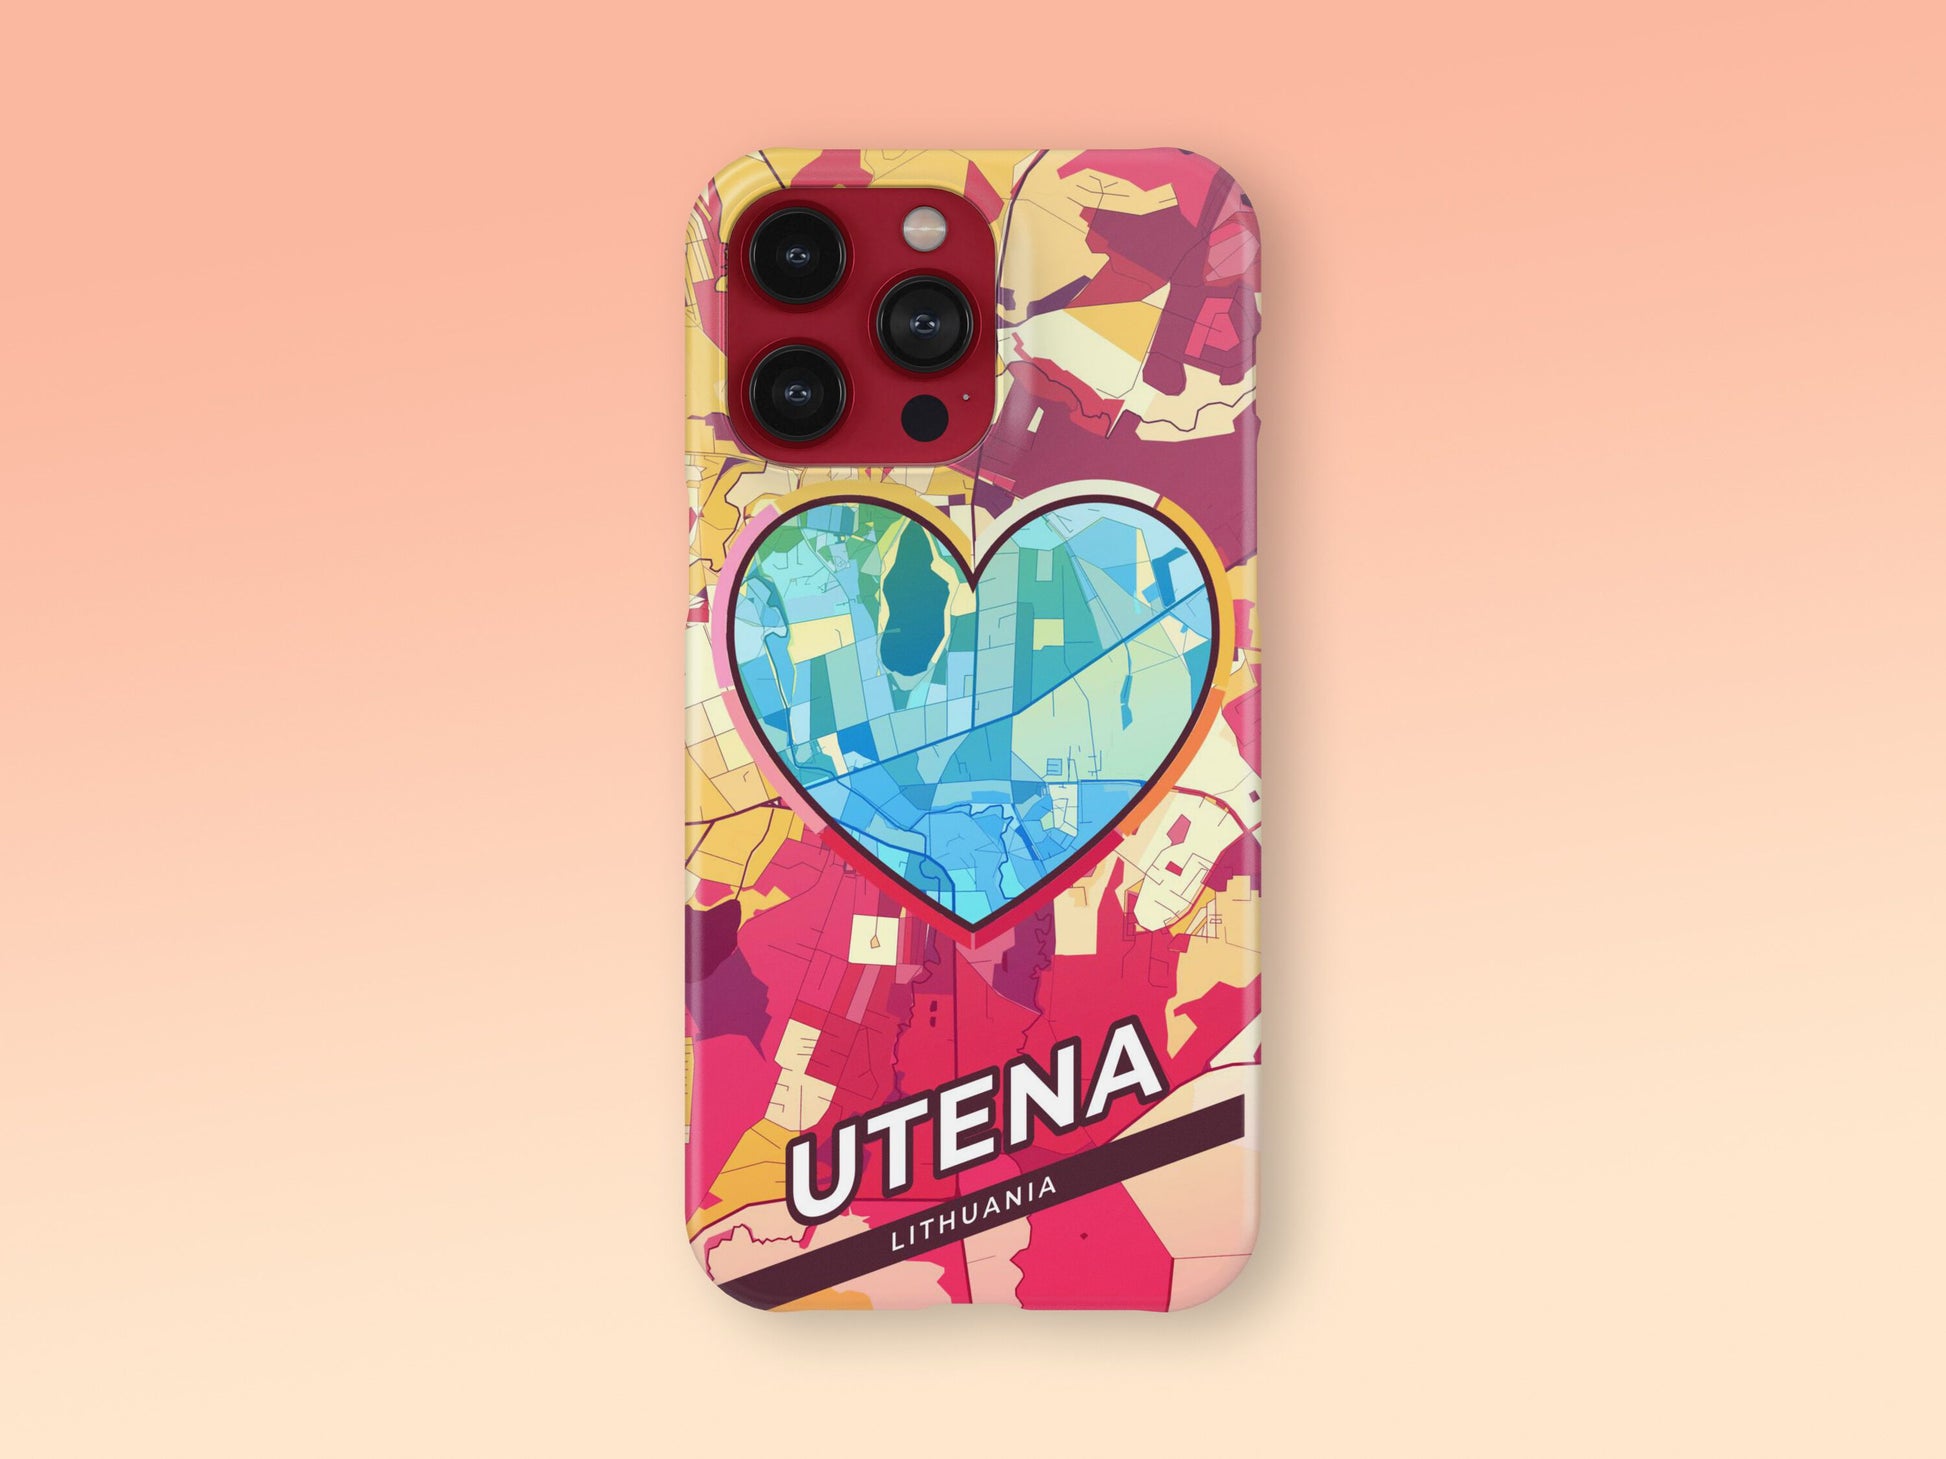 Utena Lithuania slim phone case with colorful icon 2